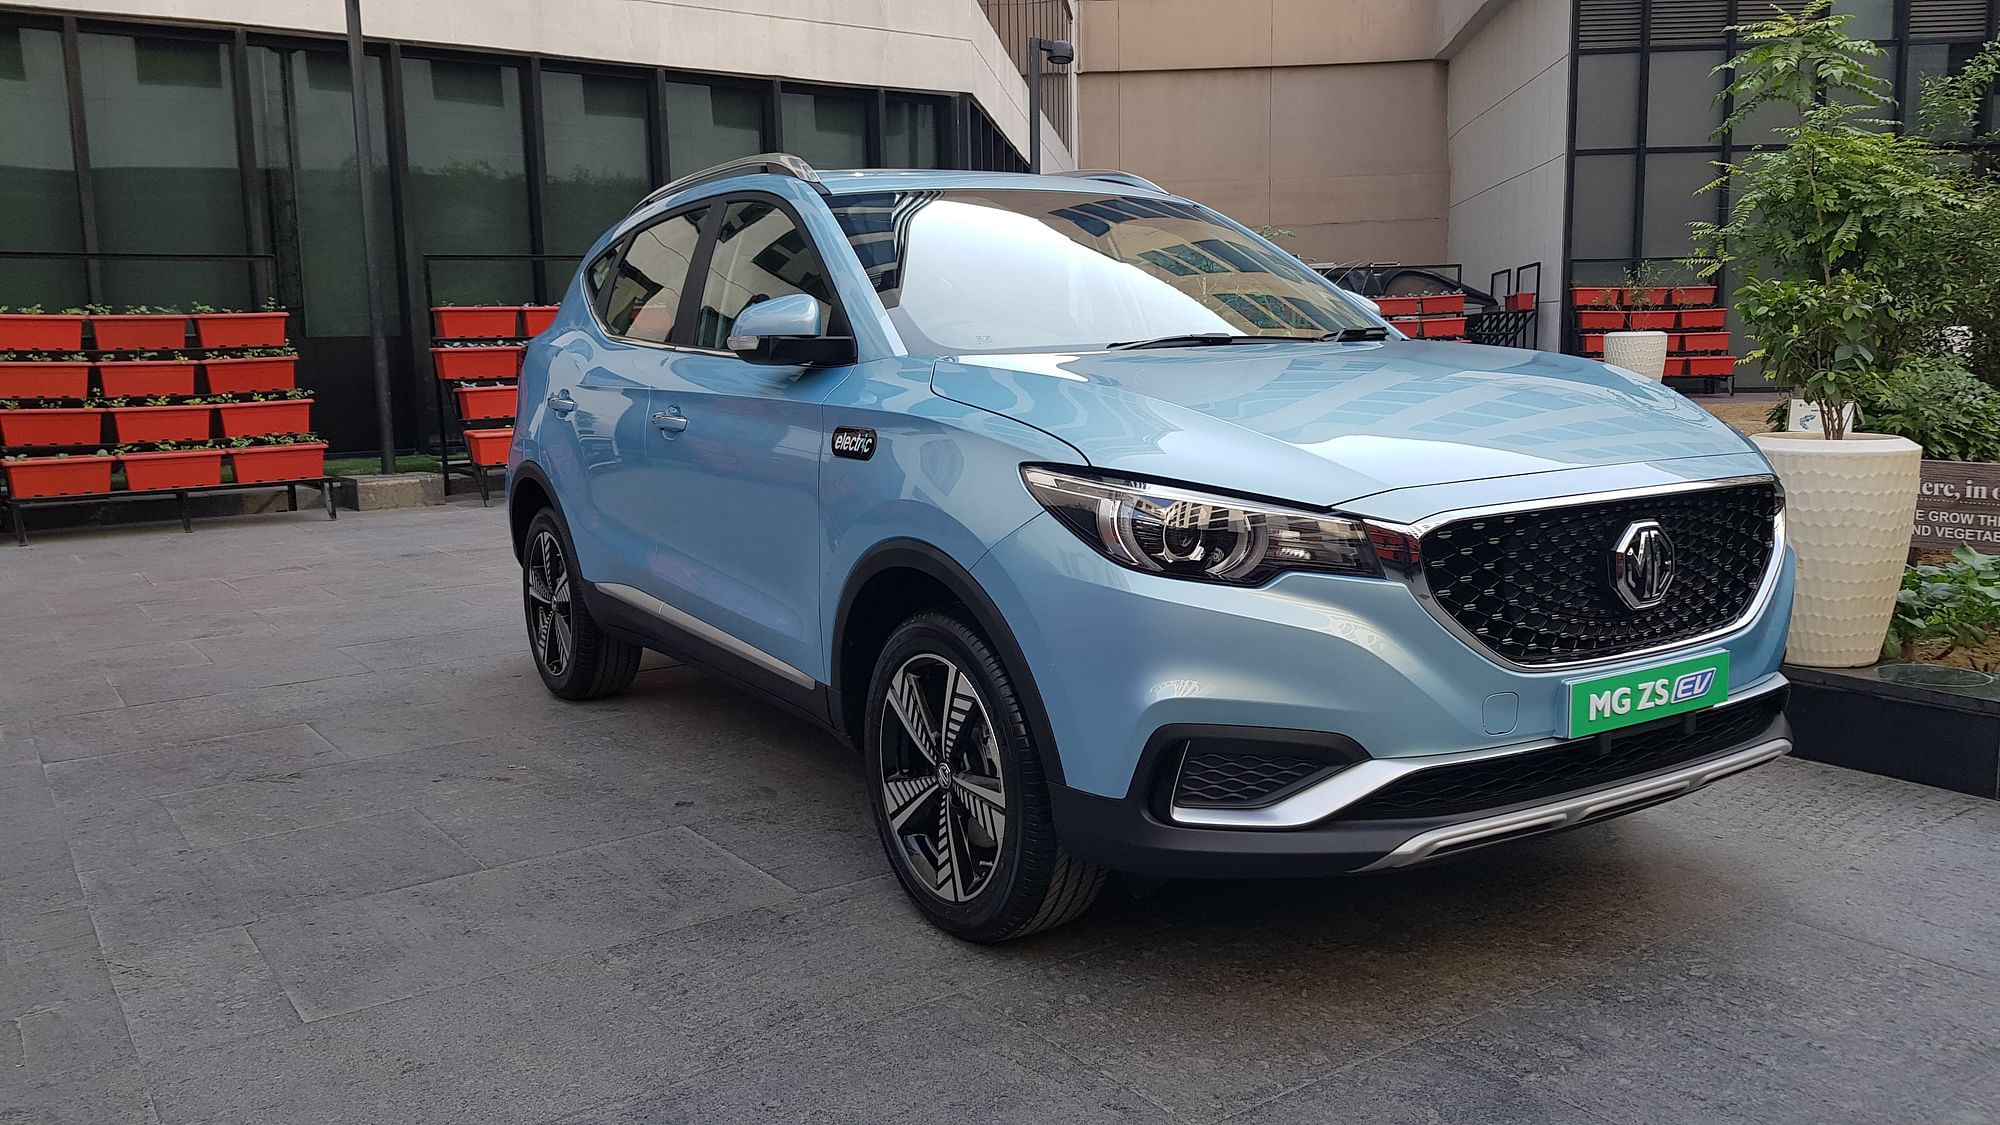 The MG ZS EV will be delivered to buyers from January 2020.&nbsp;